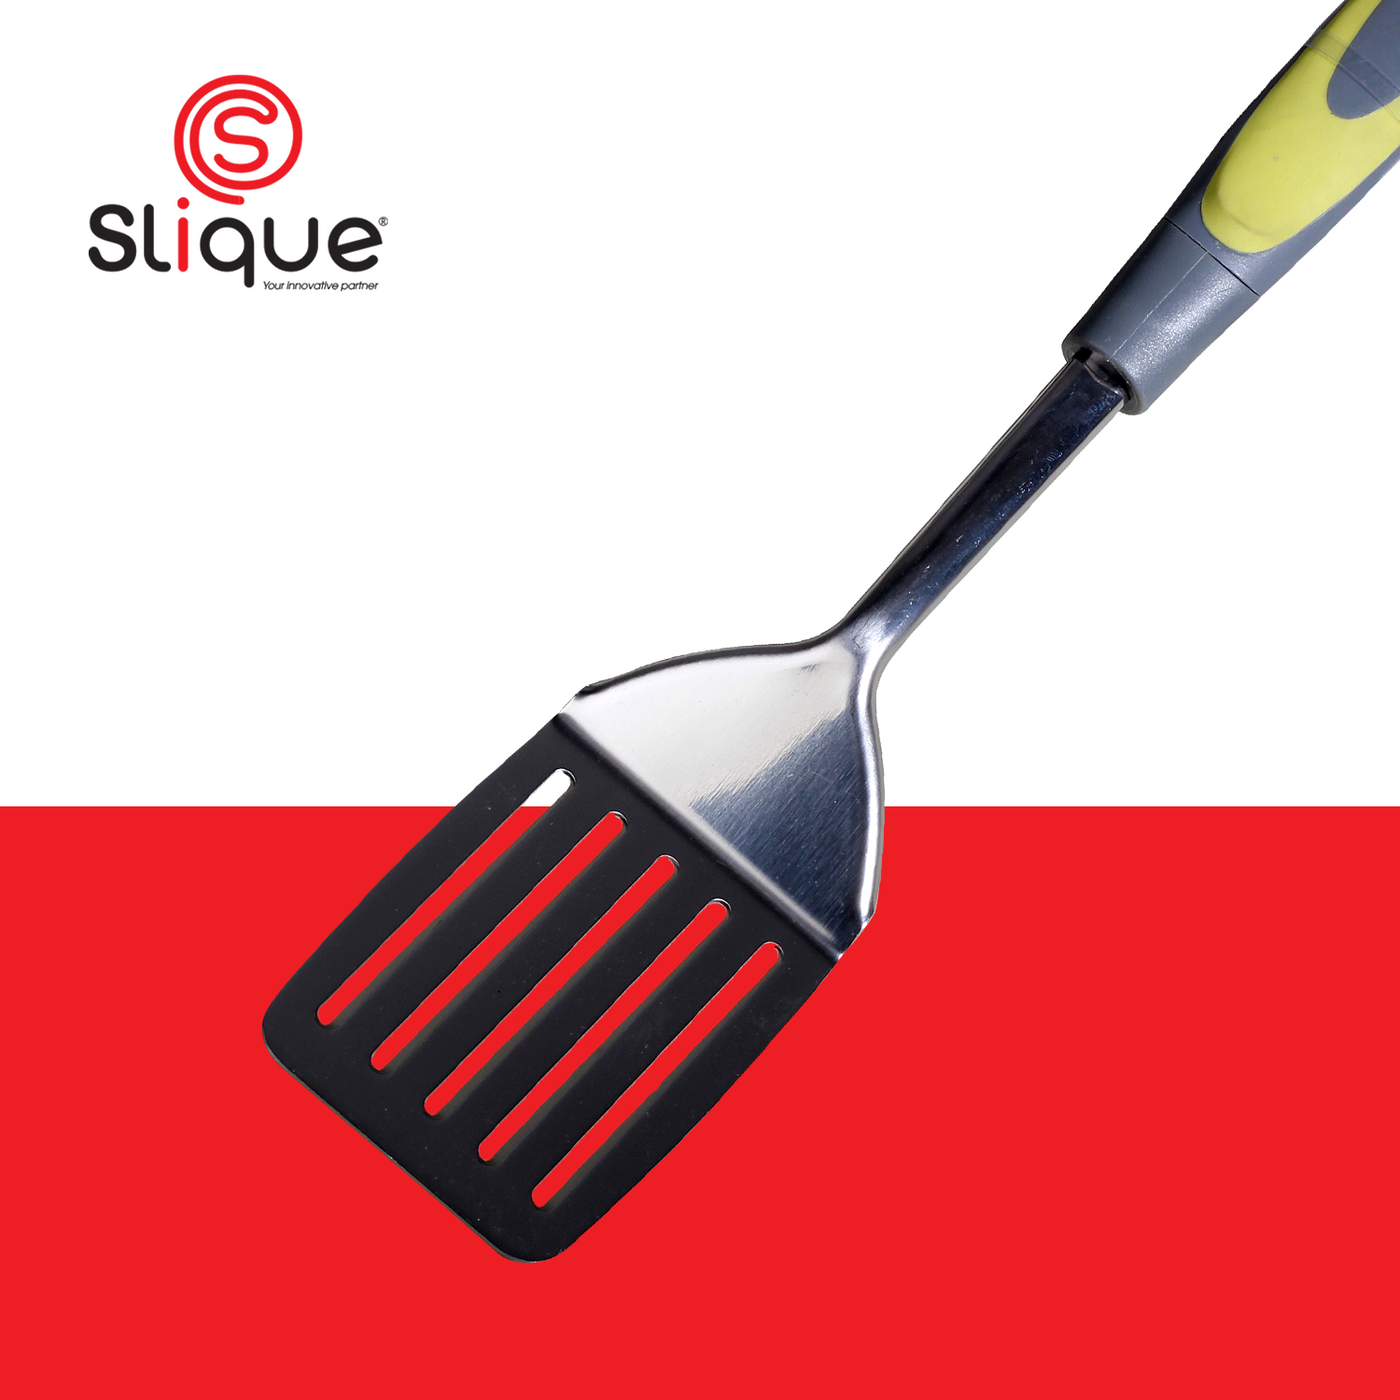 SLIQUE Premium 18/8 Stainless Steel Slotted Turner TPR Silicone Handle Kitchen Essentials Amazing Gift Idea For Any Occasion! (Green)